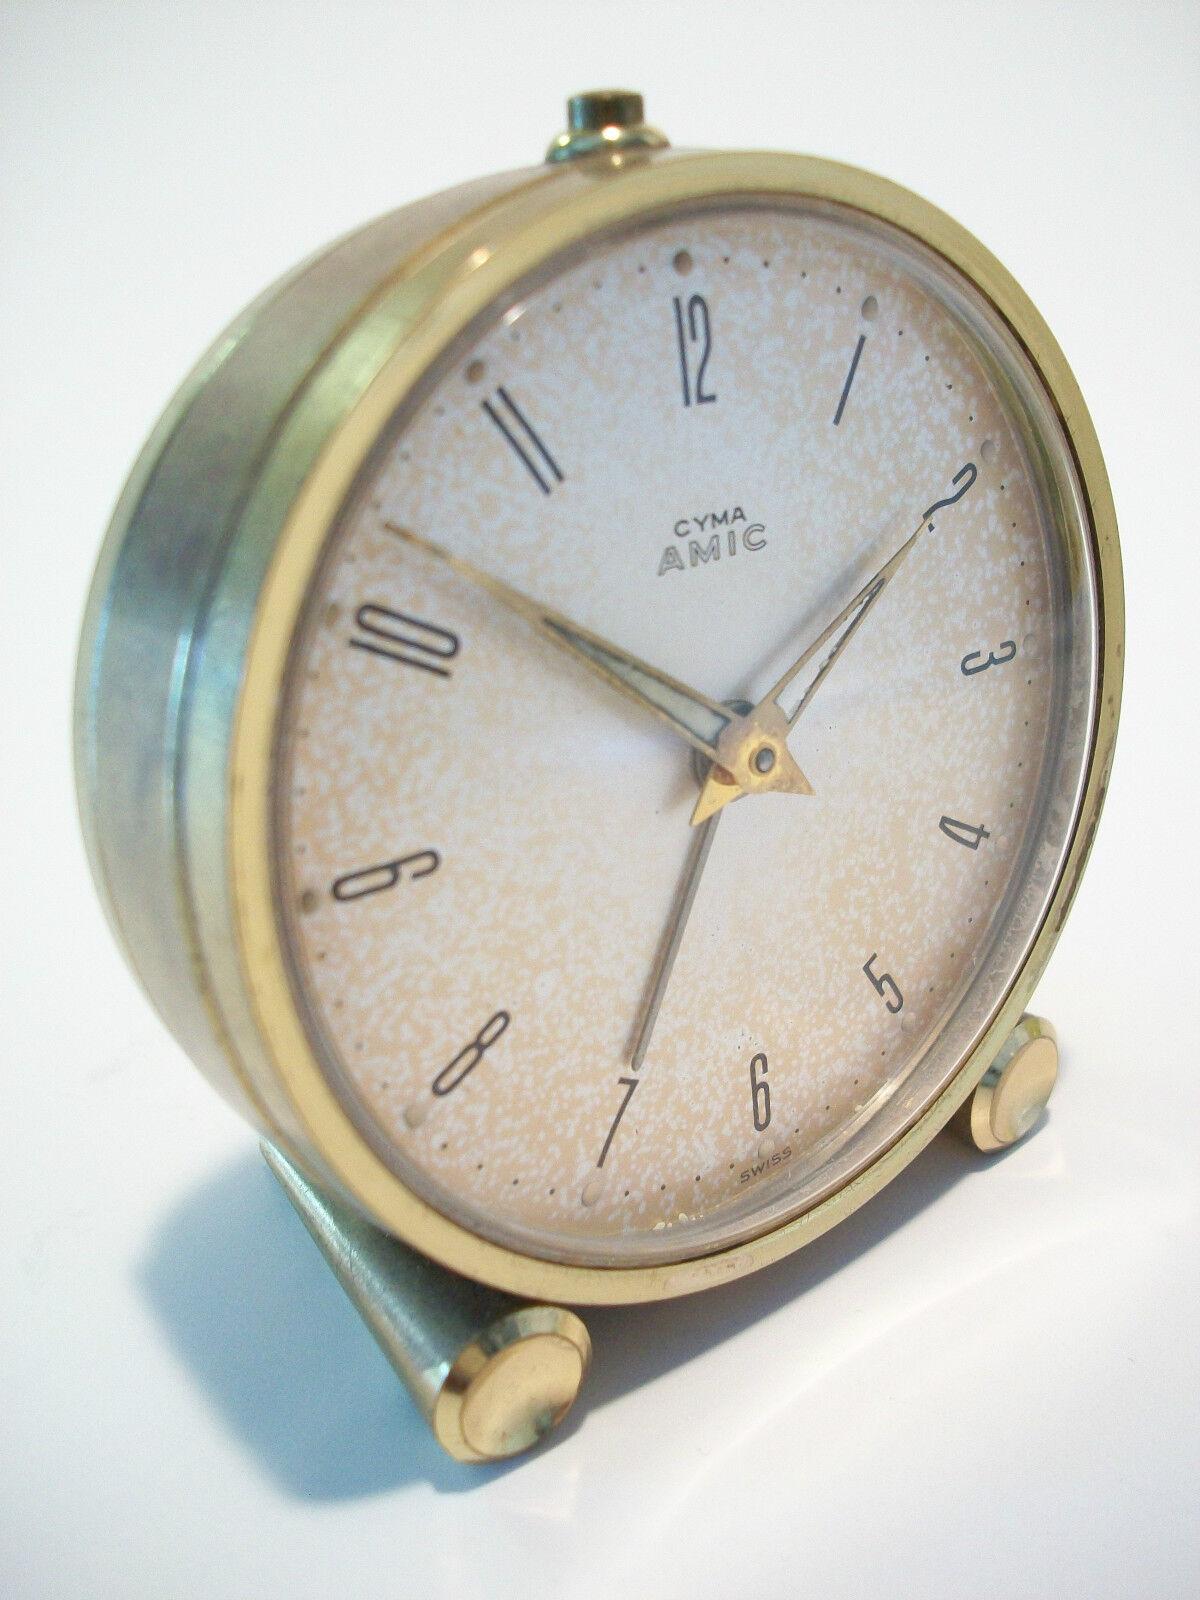 CYMA WATCH COMPANY - Brass alarm clock - Swiss made - circa 1950's.  Features include - manual wind - alarm stop on top and back - 11 jewels - separate dials for adjusting the time and the alarm - glow in the dark hands with reference marks above